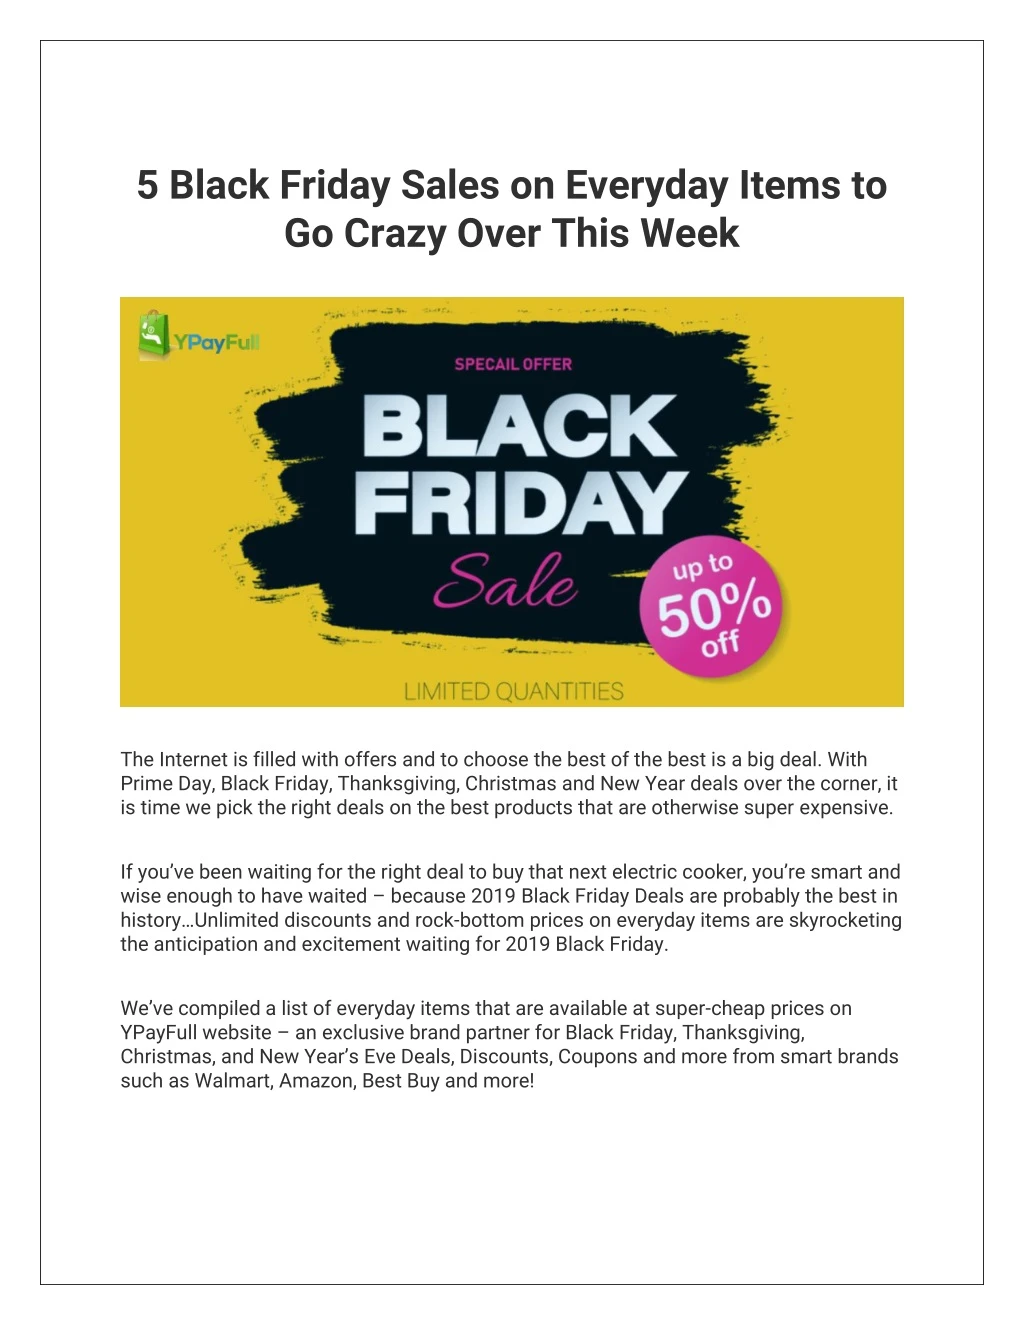 5 black friday sales on everyday items